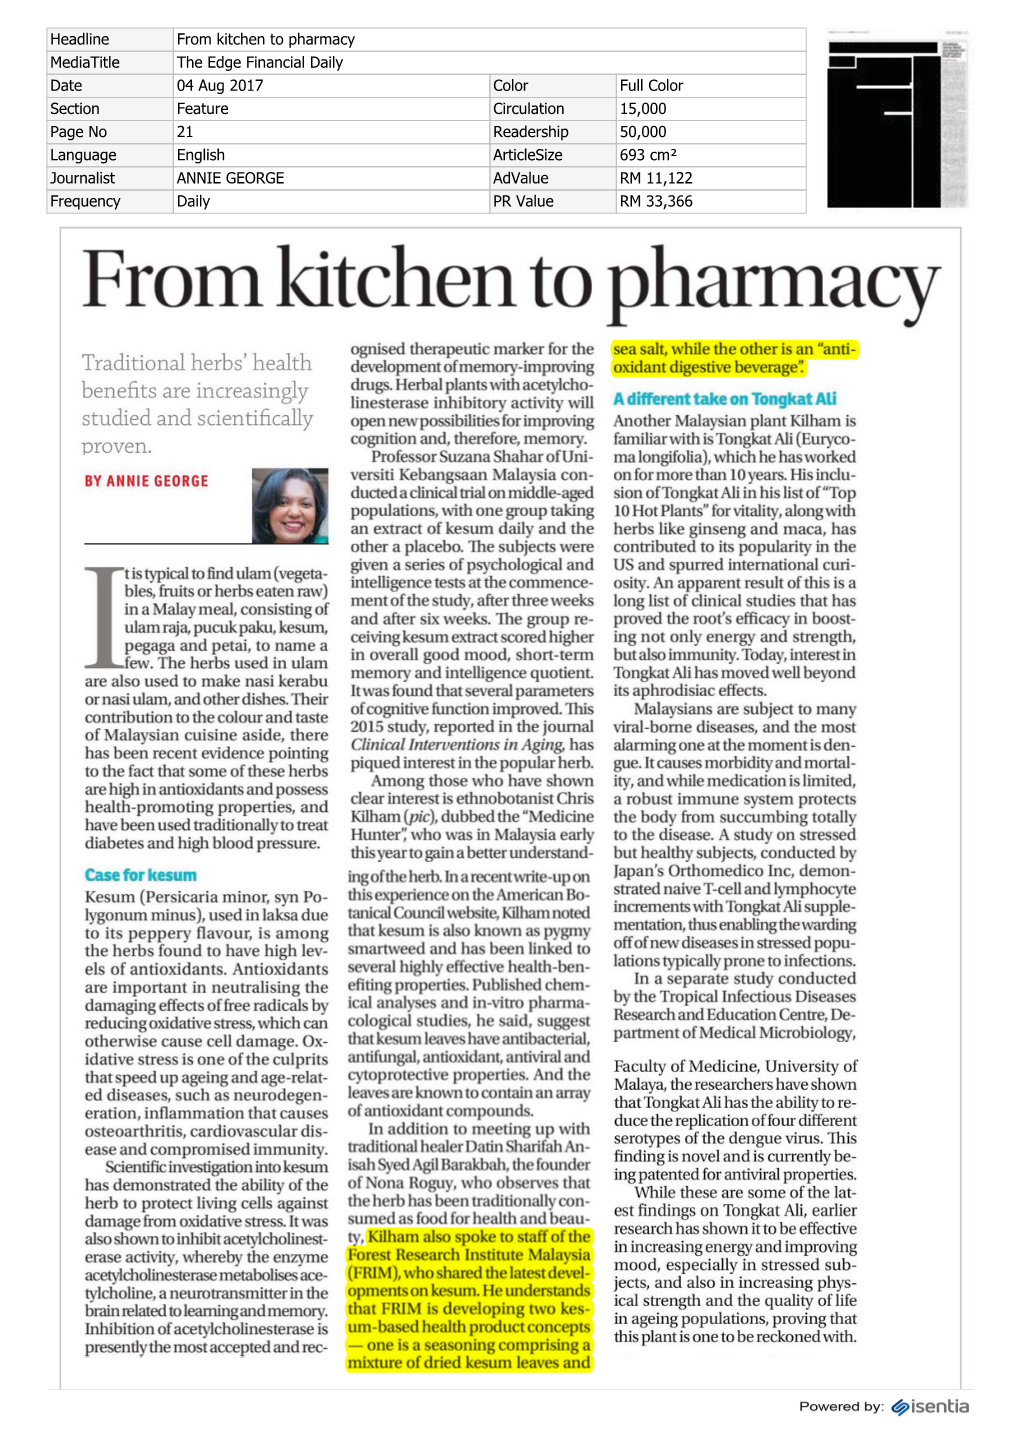 From Kitchen to Pharmacy